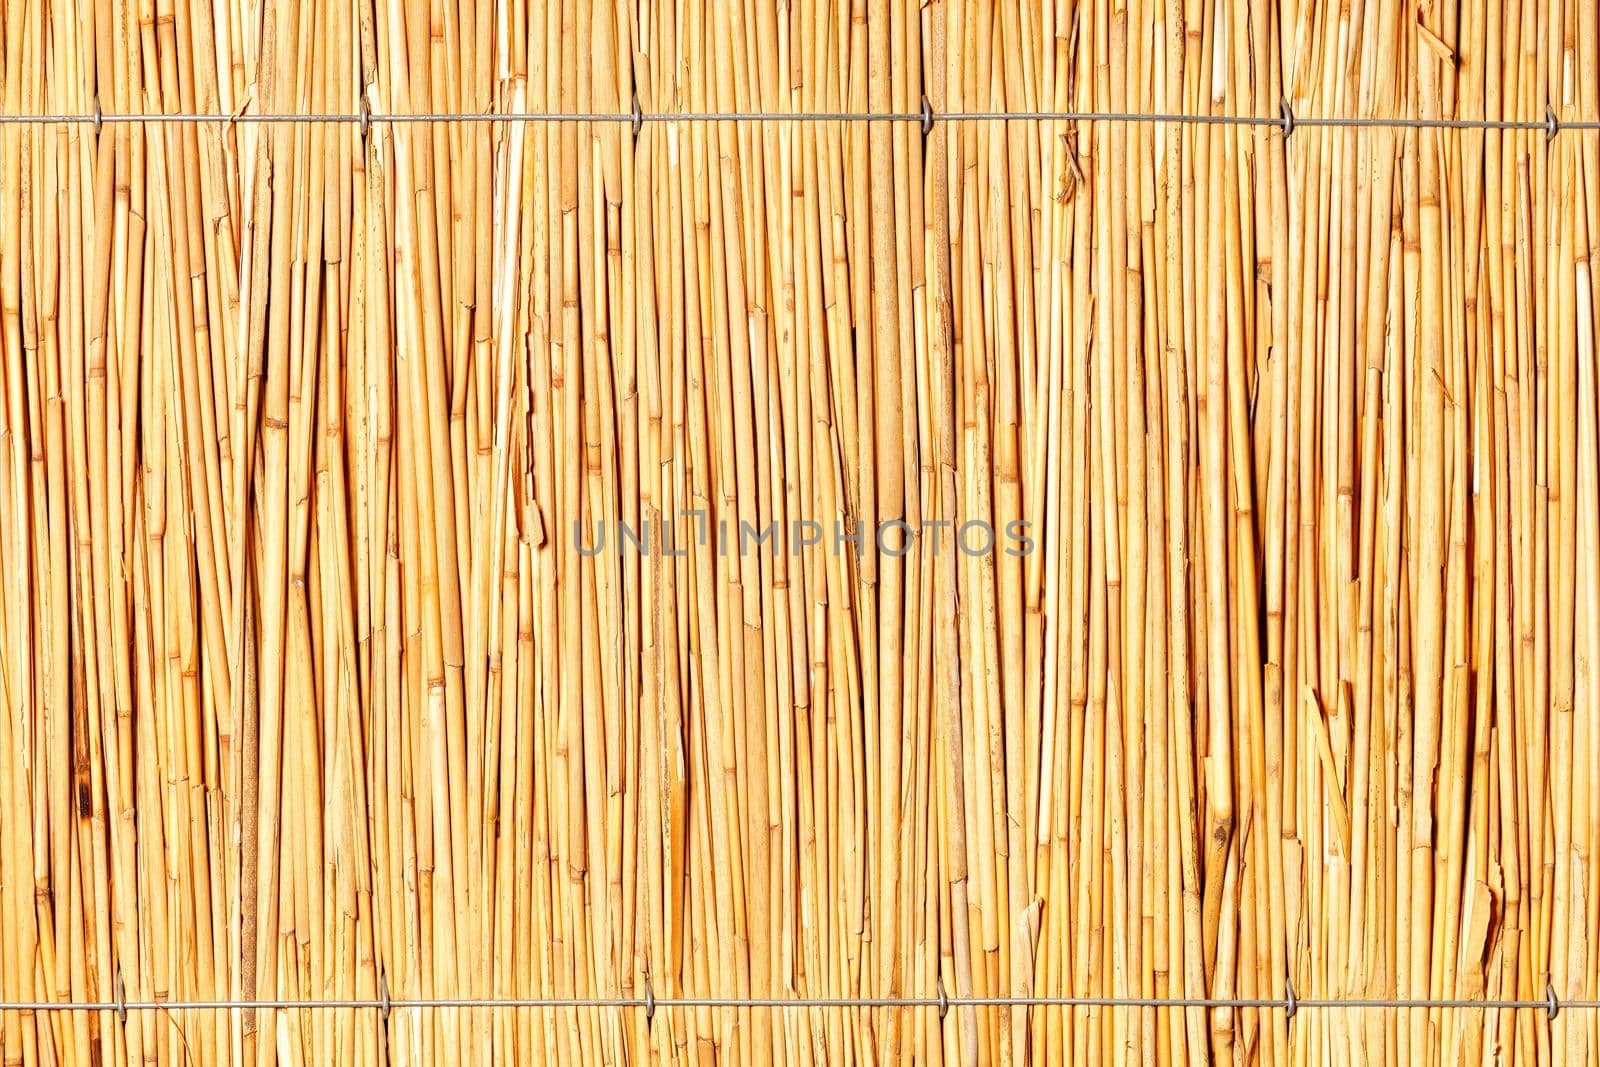 A reed wall with a bright texture and a light yellow background, tied with steel wire. High resolution, close-up.